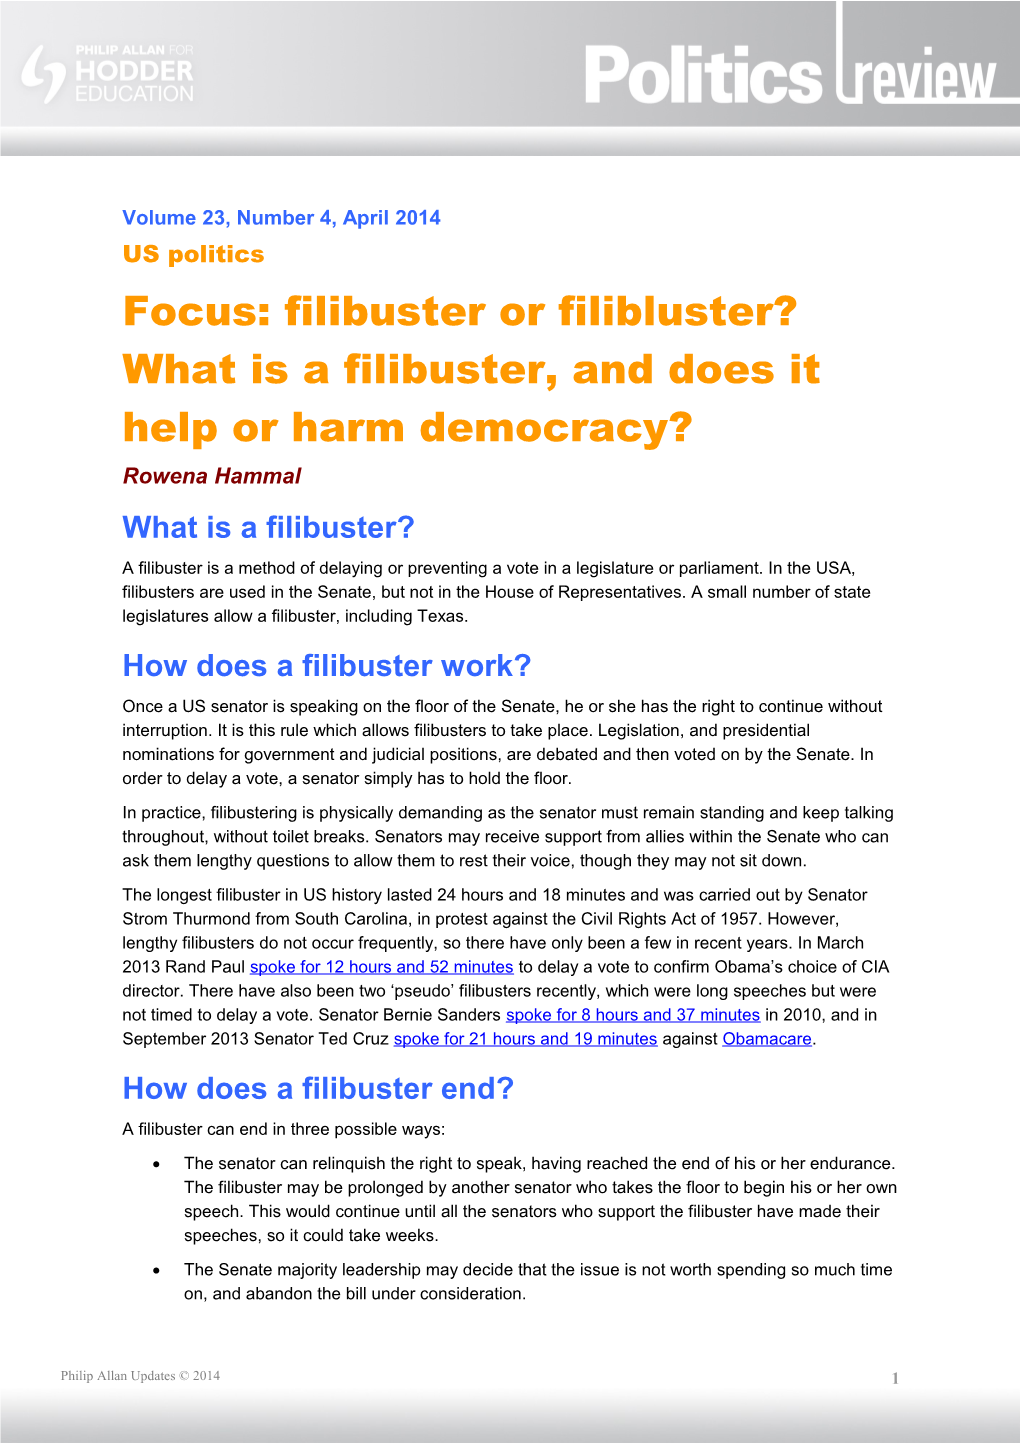 Focus: Filibuster Or Filibluster? What Is a Filibuster, and Does It Help Or Harm Democracy?